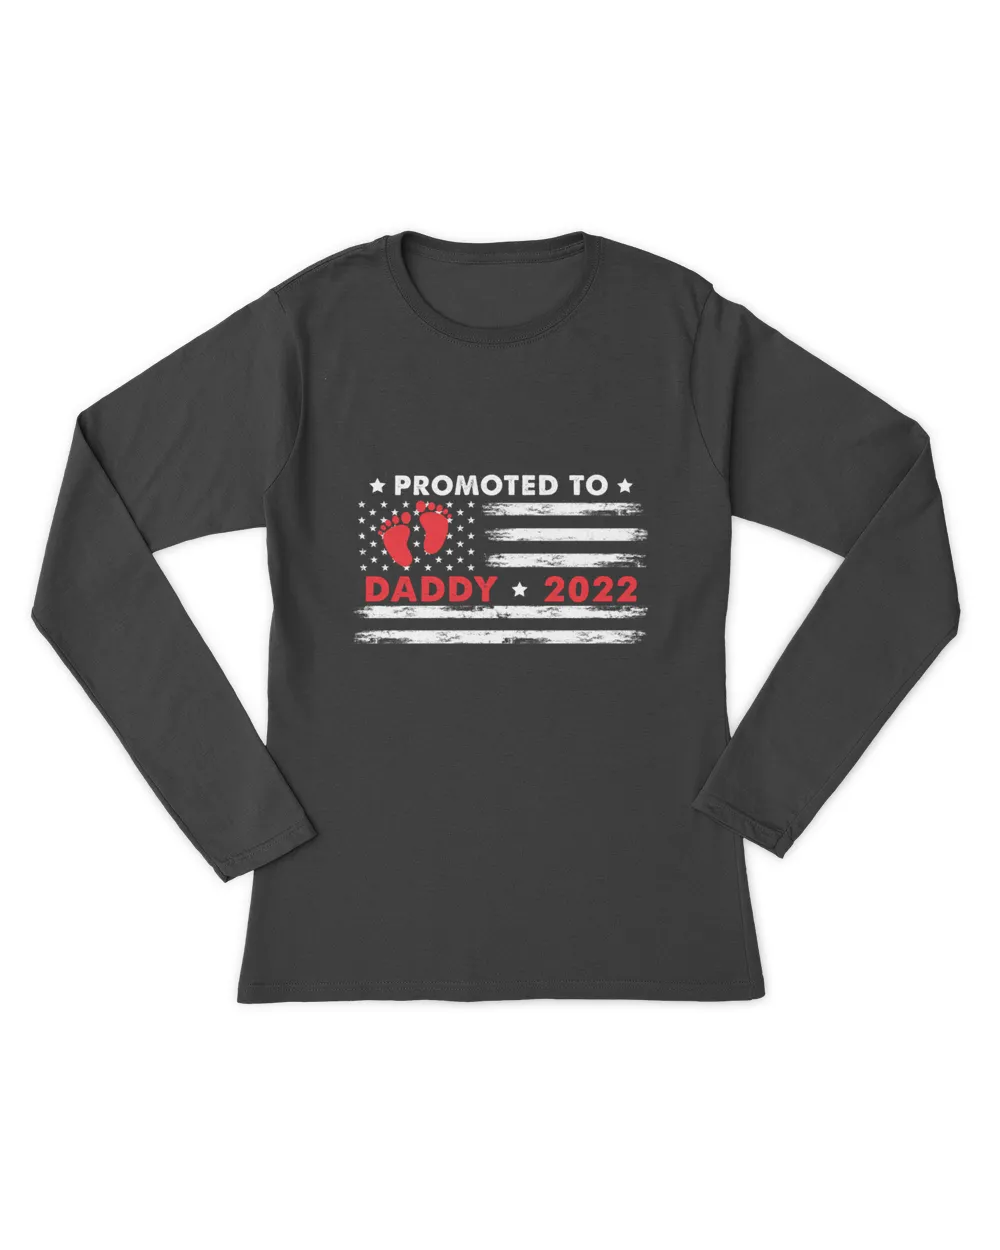 RD Promoted To Daddy Shirts, Dad Shirt, Pregnancy Announcement Shirt, Pregnancy Shirt, Dad EST. 2022 Shirt,Daddy Shirt,New Daddy Shirt